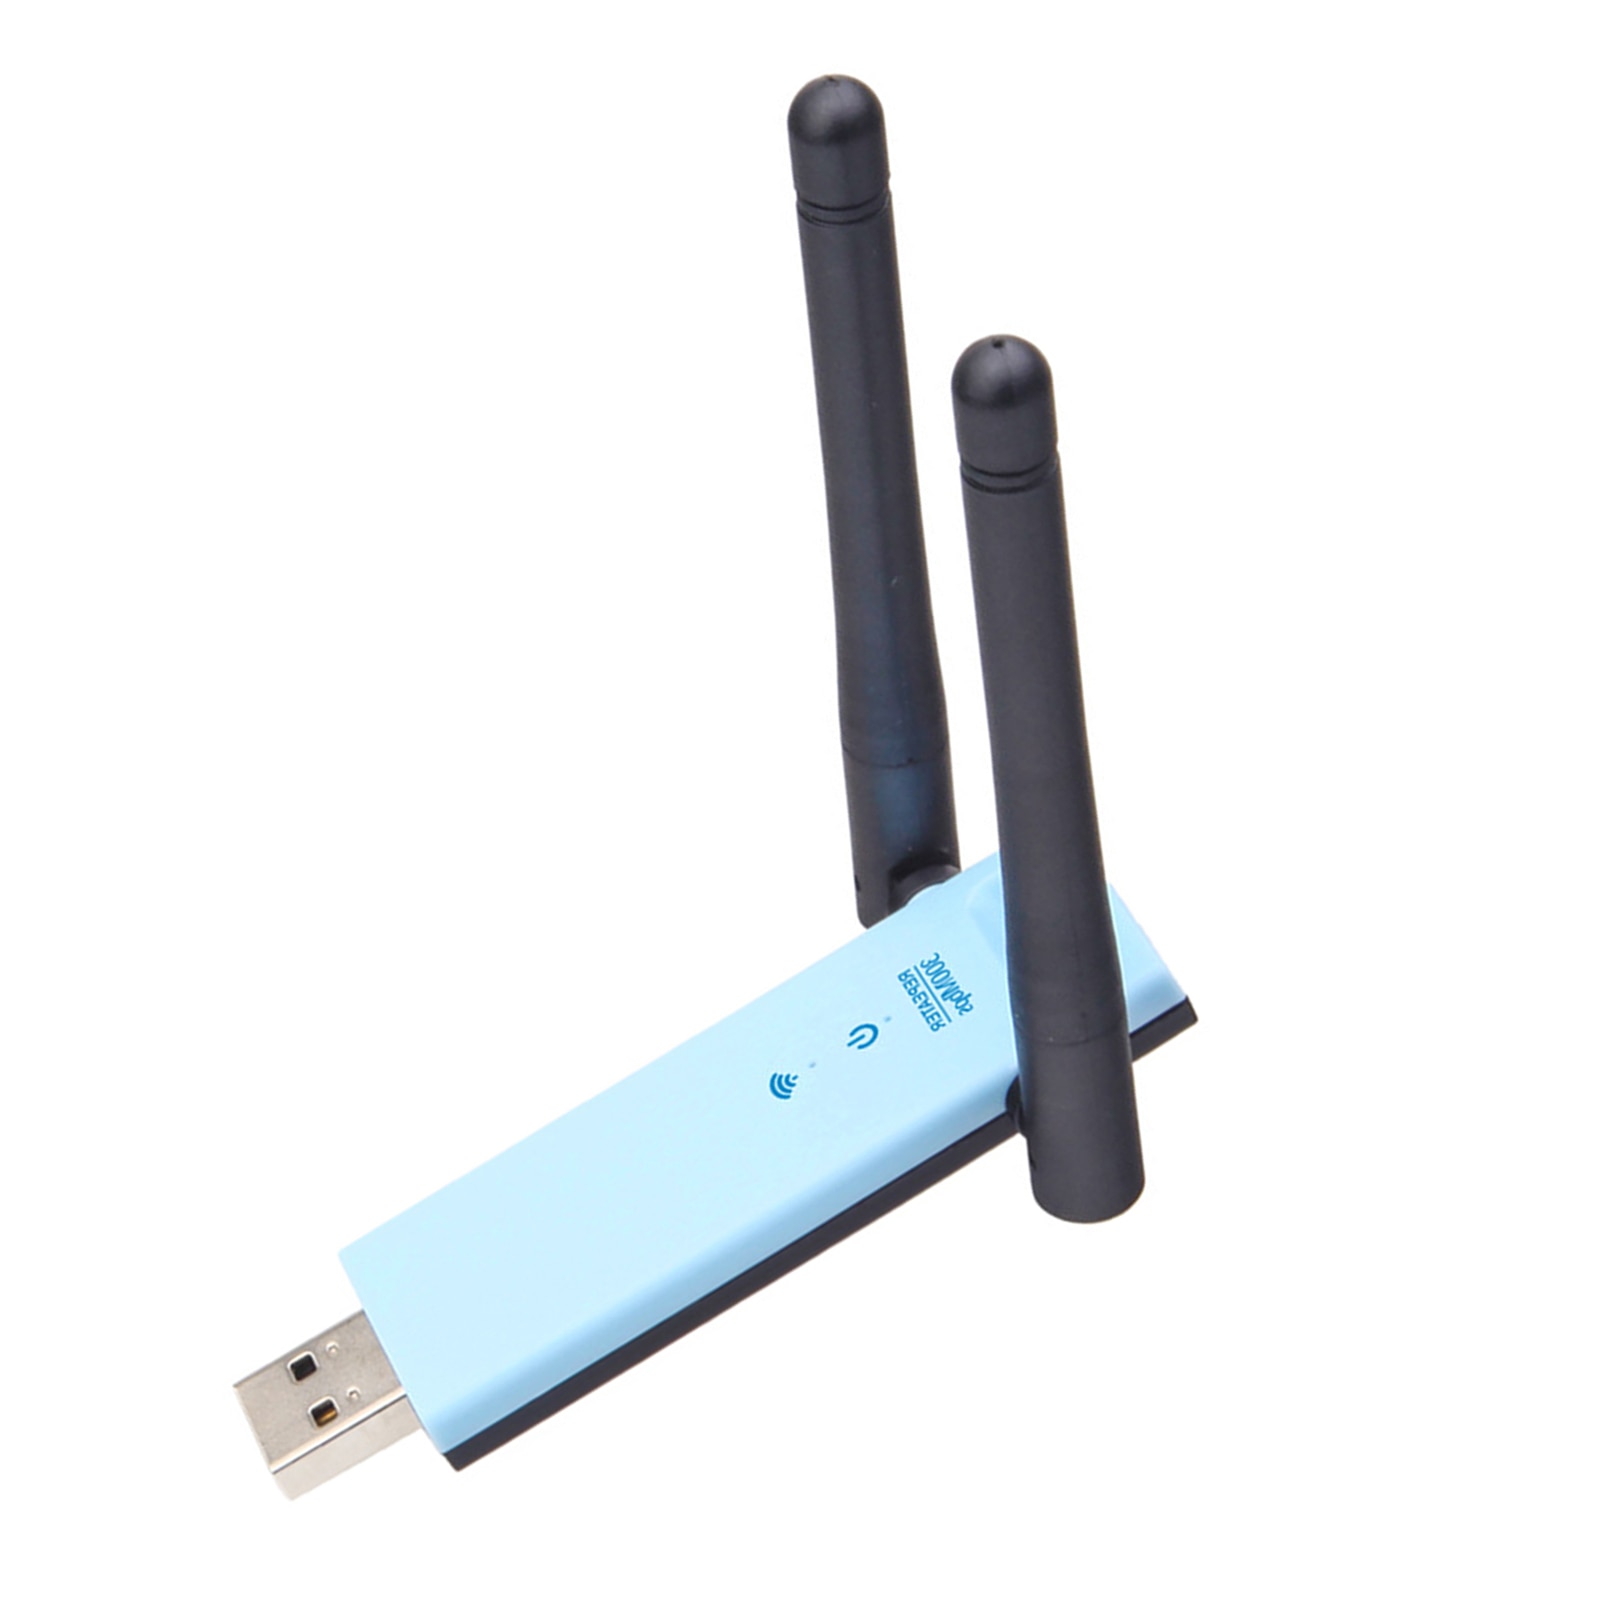 Wireless Repeater Dual Antenna Signal Amplifier Double Band Expansion USB WiFi Adapter for Laptop Access, etc. Home